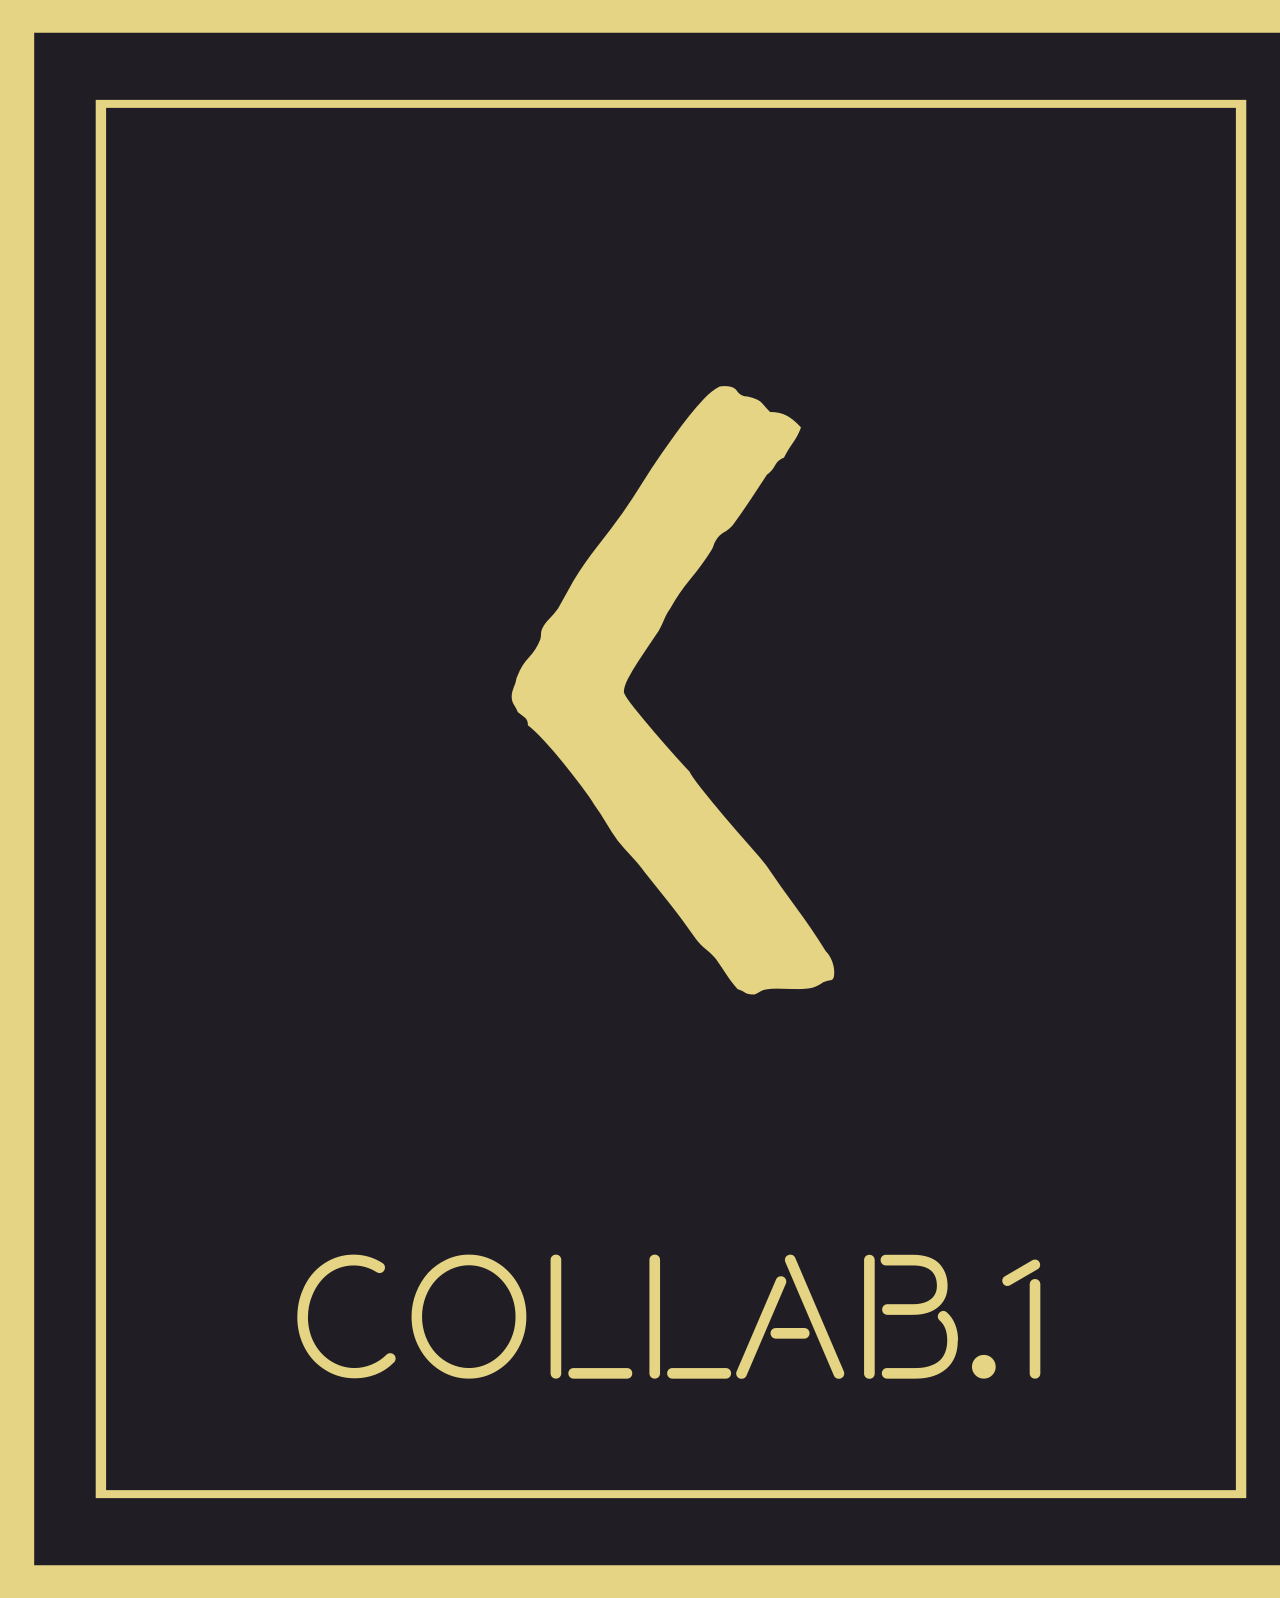 Collab.1's web page